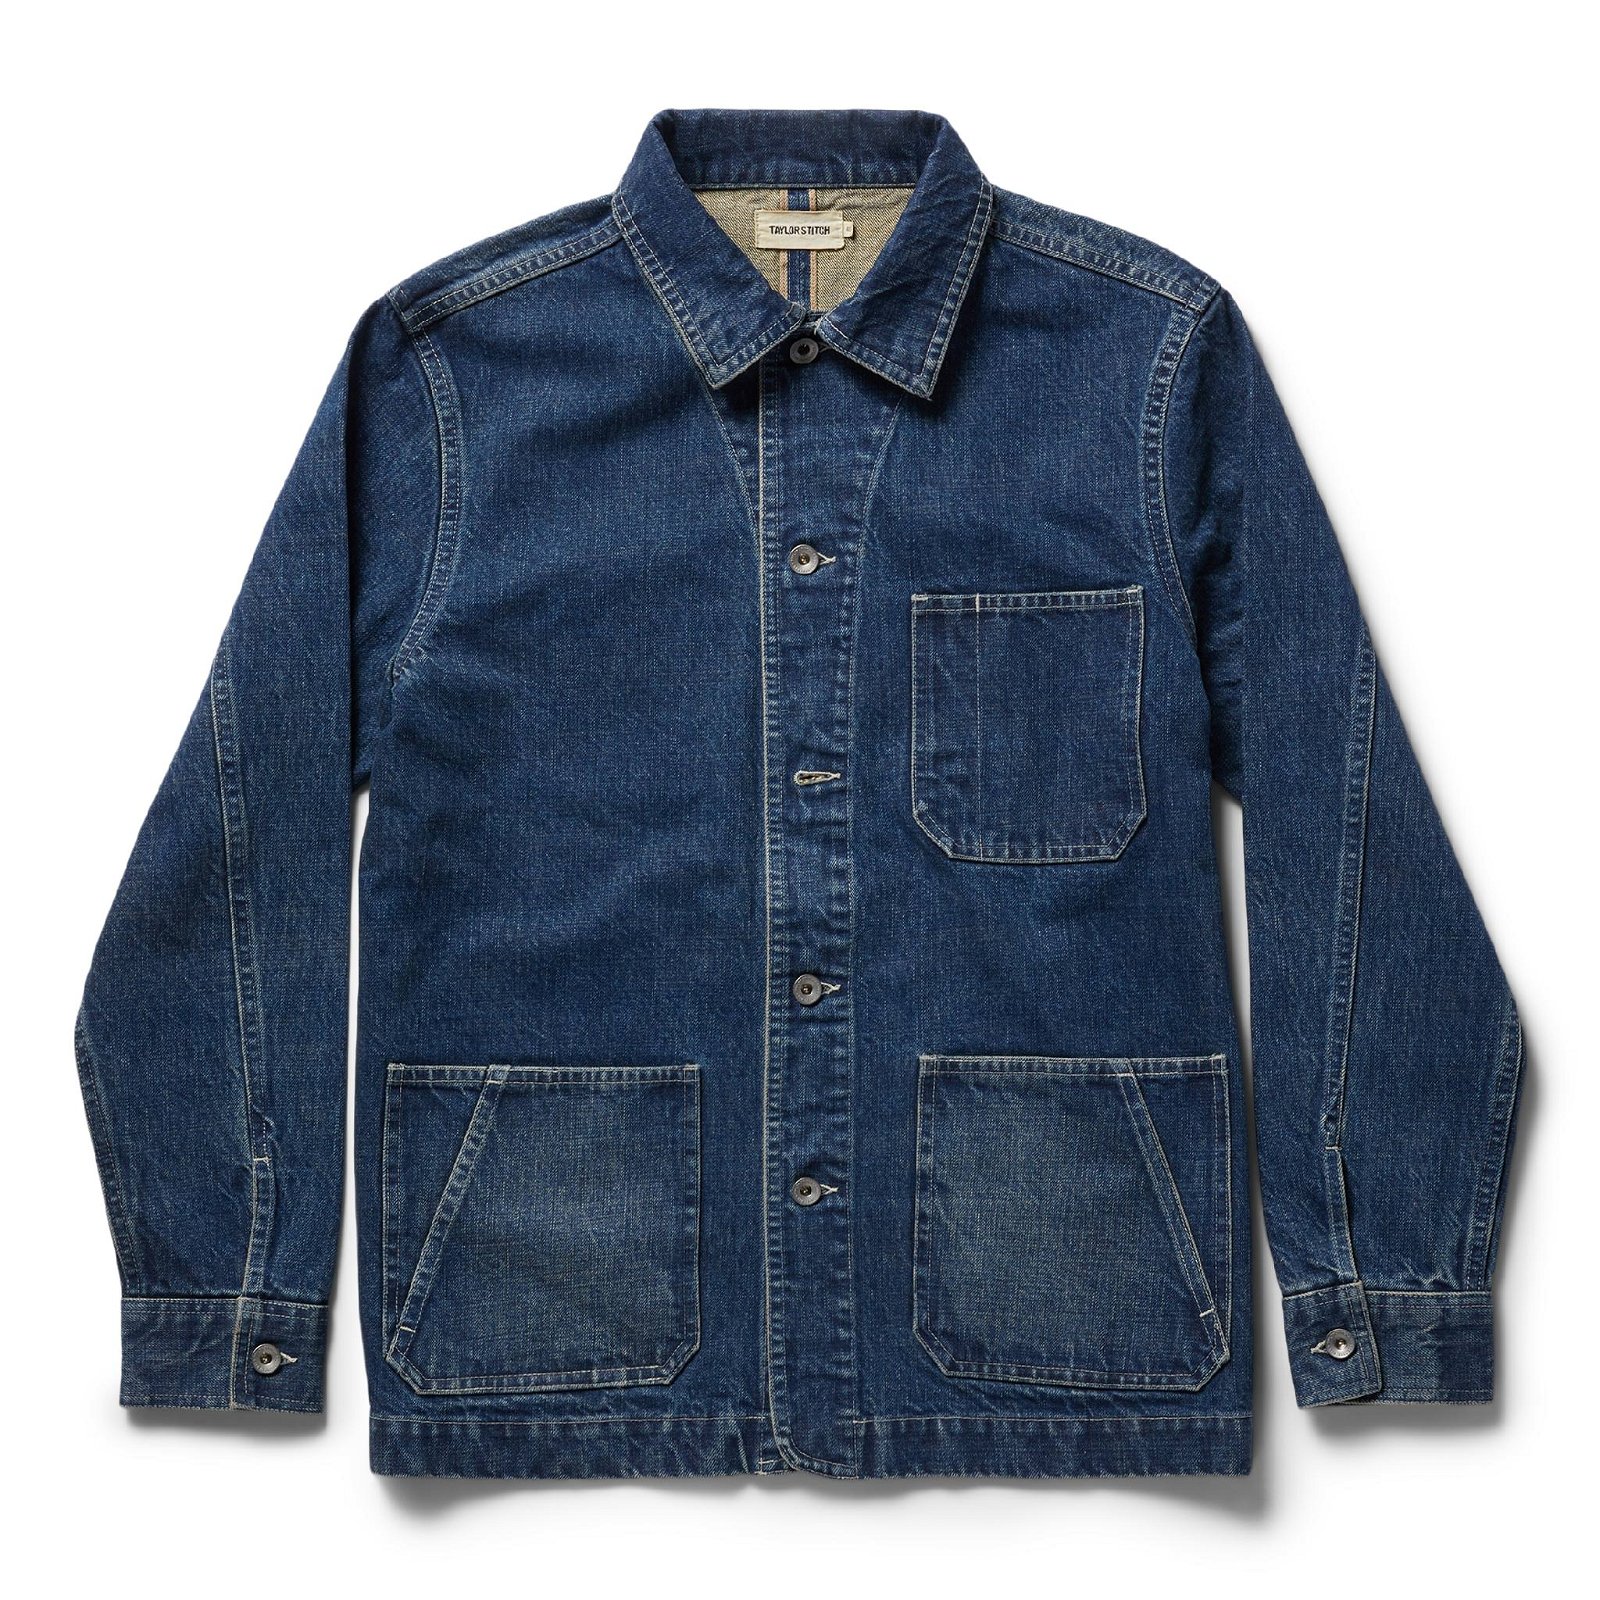 Image of The Ojai Jacket in Sawyer Wash Selvage